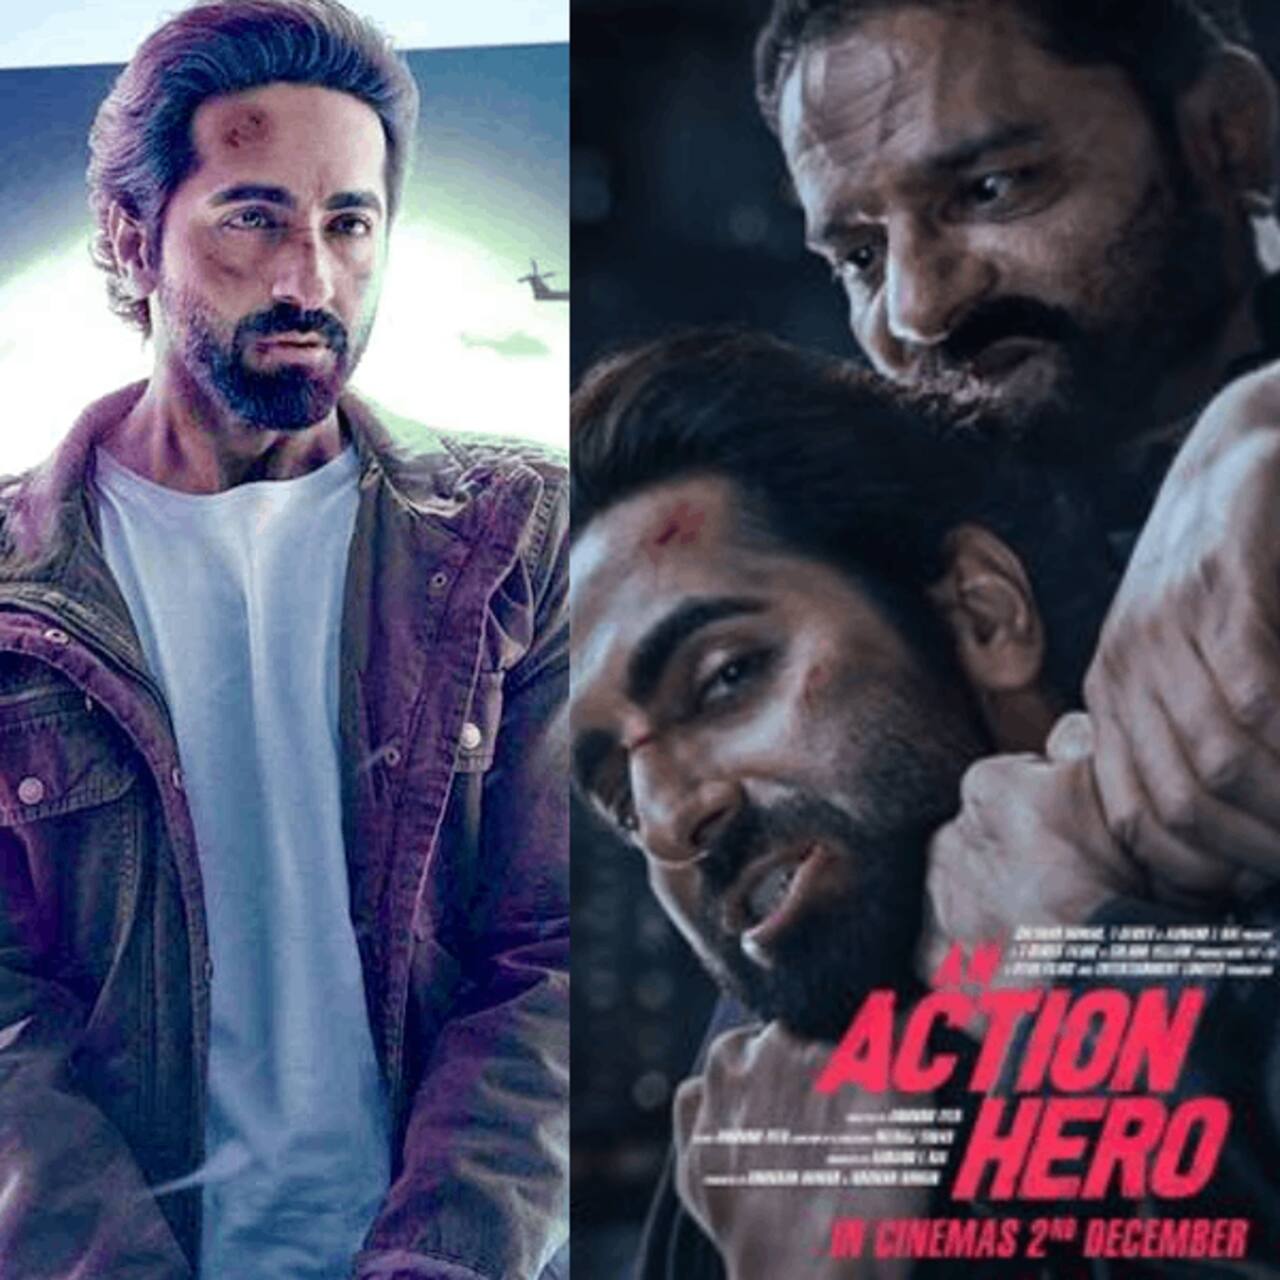 An Action Hero Movie Review: Ayushmann Khurrana-Jaideep Ahlawat starrer impresses netizens and critics with an unexpected climax [VIEW TWEETS]